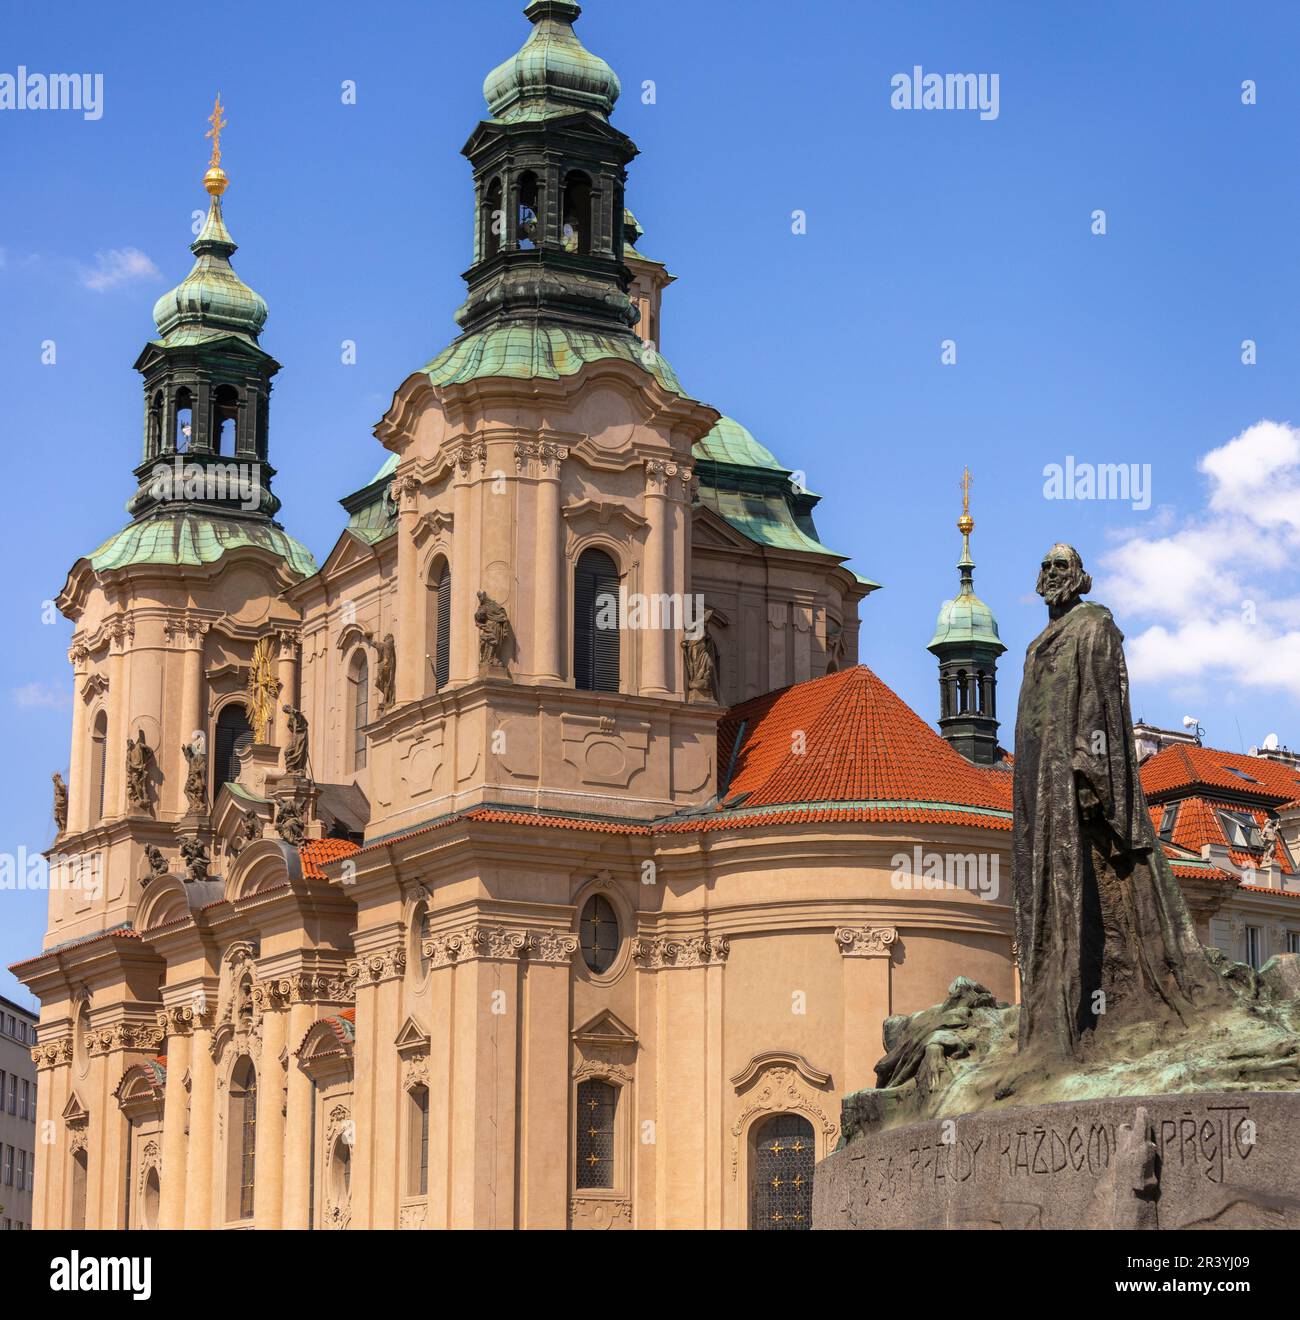 OLD TOWN SQUARE, PRAGUE, CZECH REPUBLIC, EUROPE - Jan Hus Memorial statue at right, and Church of St. Nicholas. Stock Photo